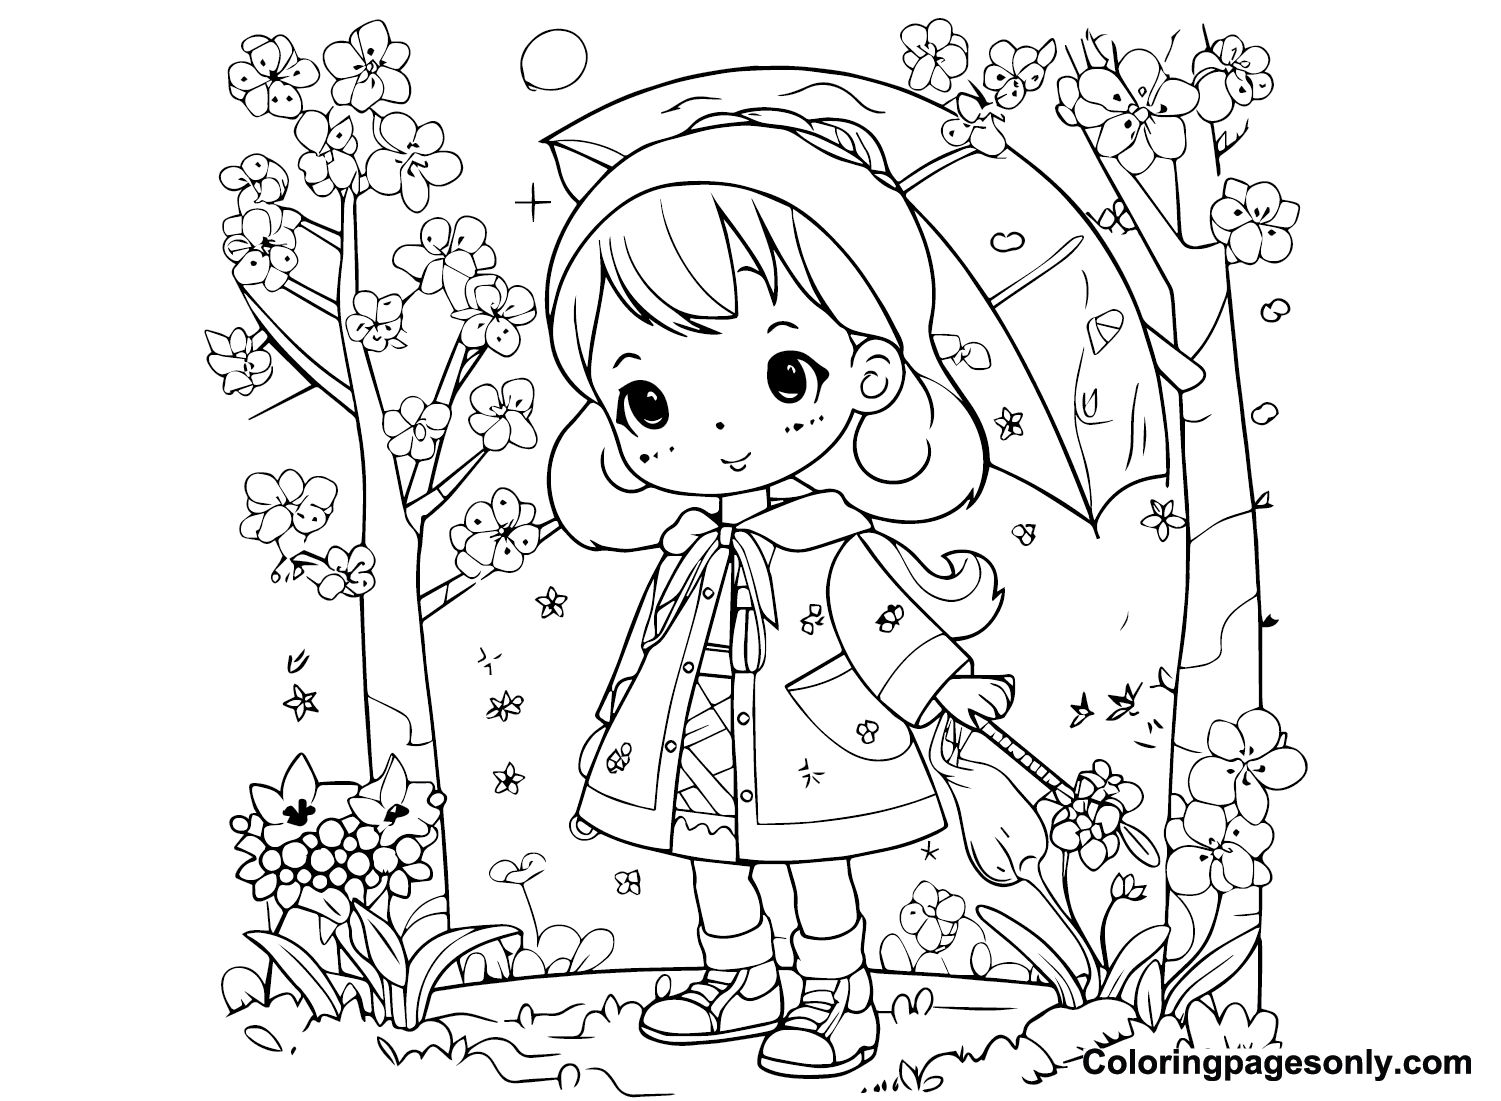 Cherry Blossom Girl Coloring Pages